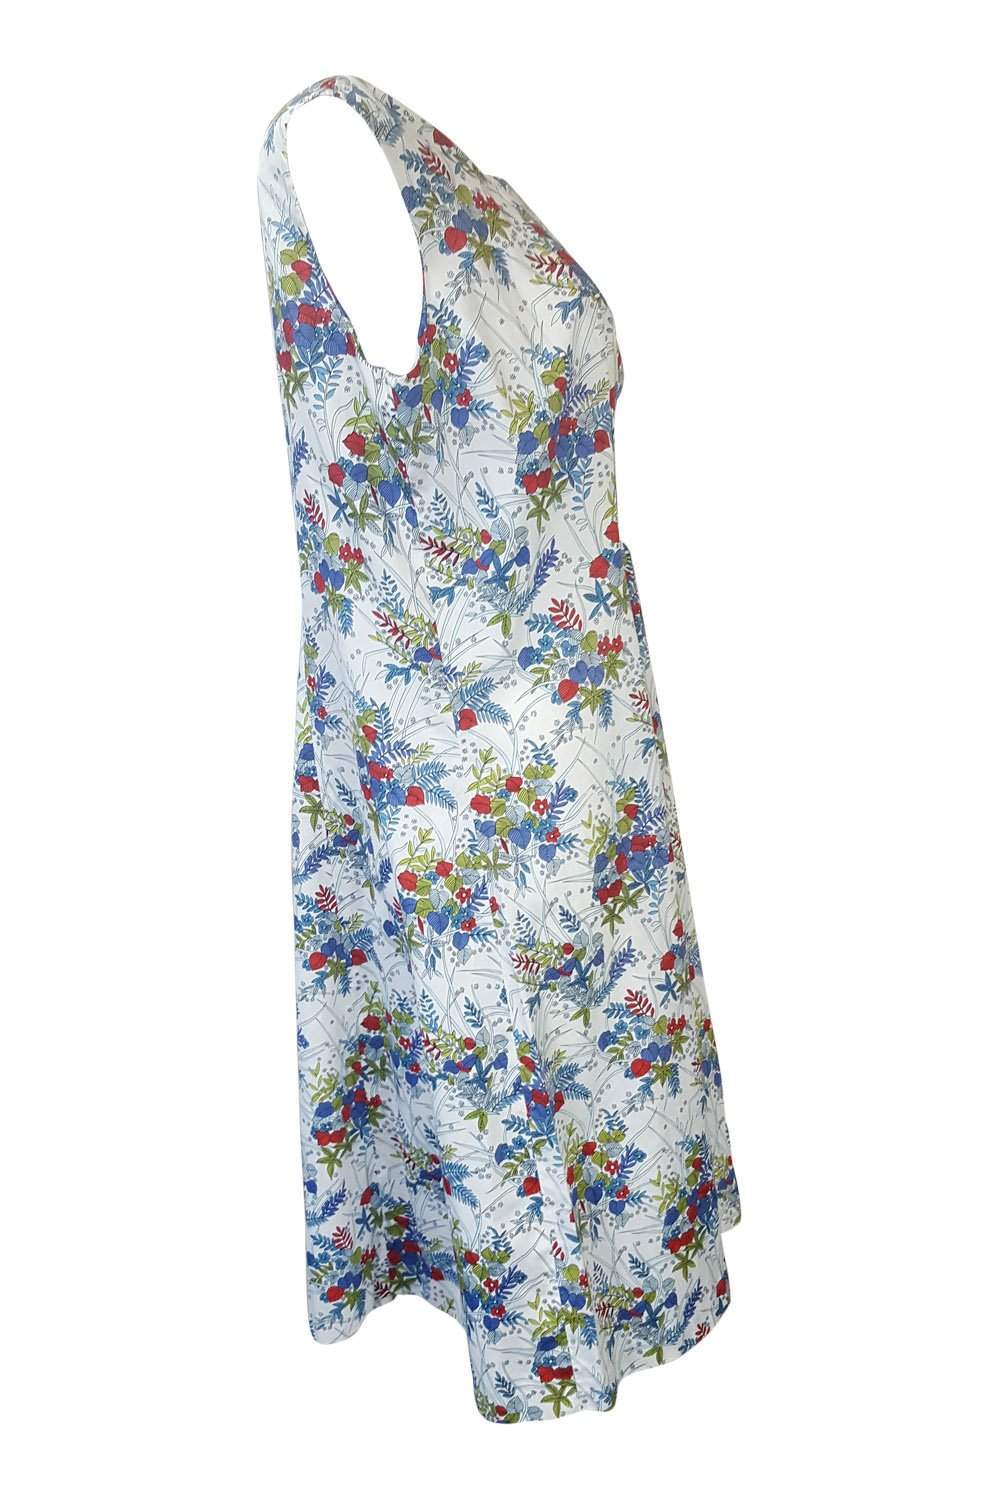 UNLABELLED Vintage 1950's Inspired Floral Sun Dress (L/M)-The Freperie-The Freperie